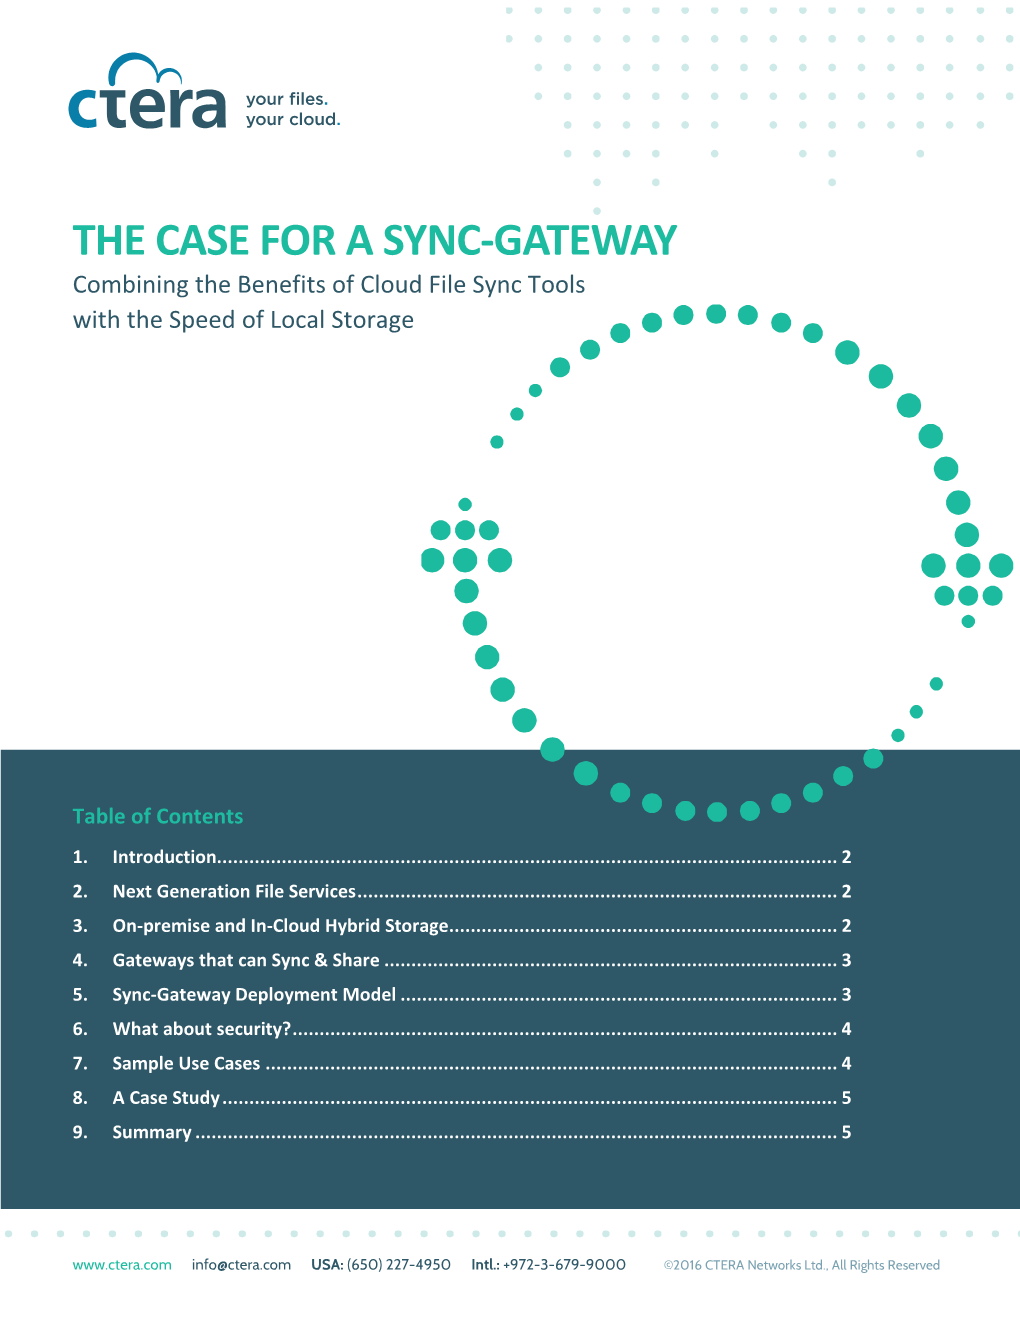 THE CASE for a SYNC-GATEWAY Combining the Benefits of Cloud File Sync Tools with the Speed of Local Storage